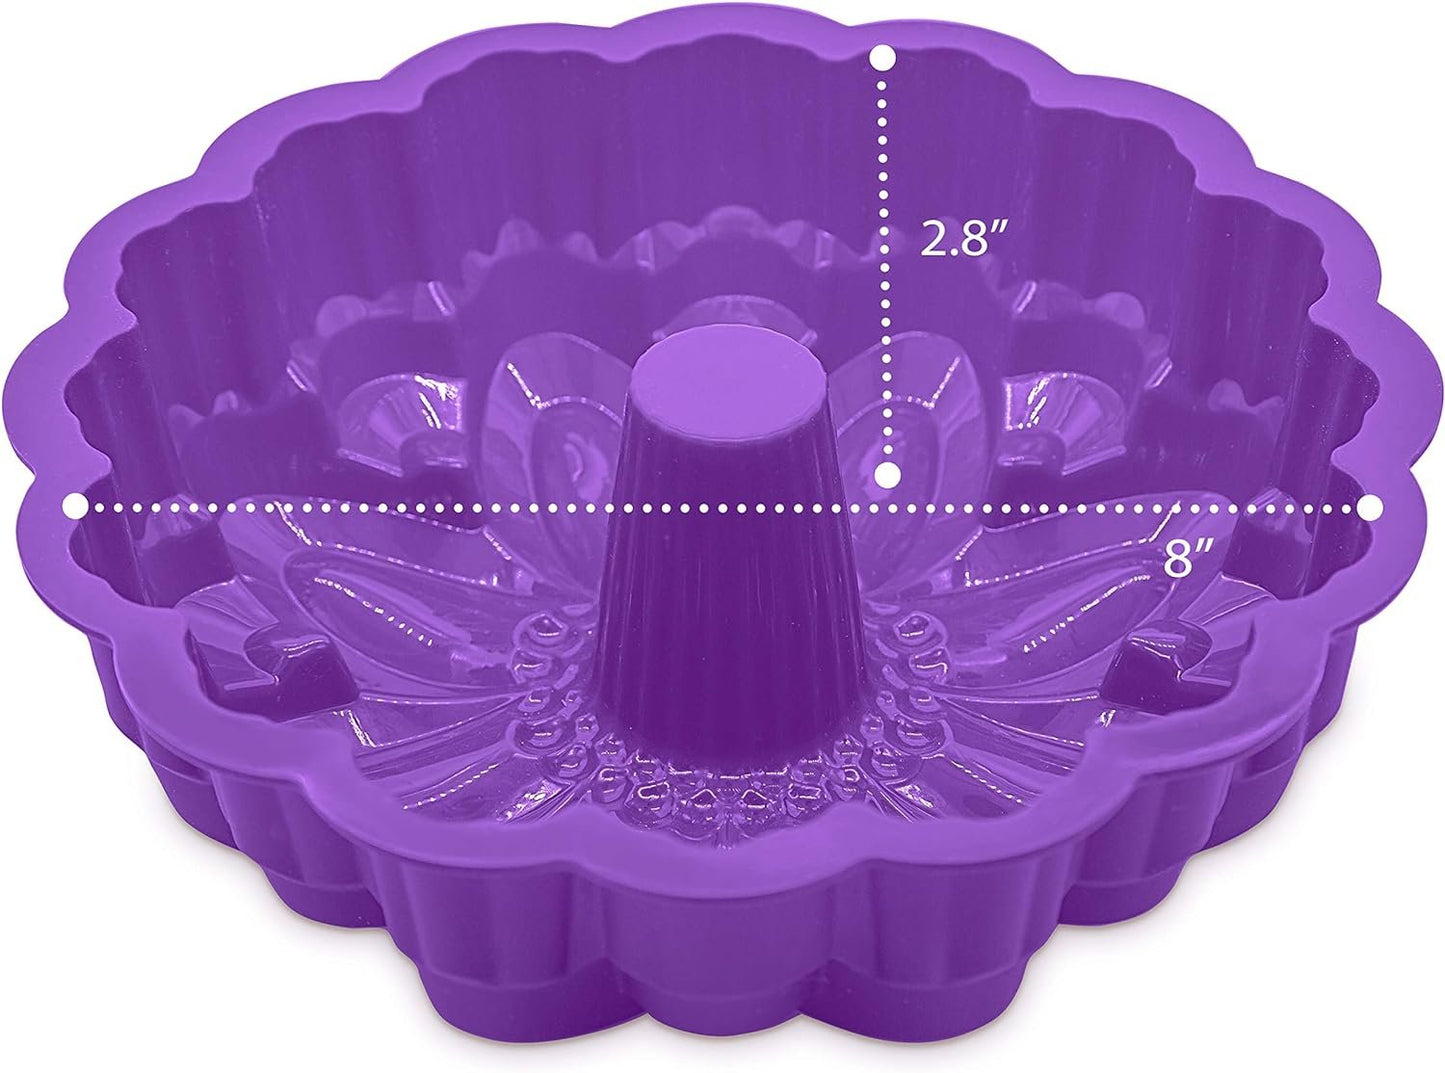 Bakerpan Silicone Cake Mold for Baking, Flower Fluted Cake Pan, 8" Cake Molds